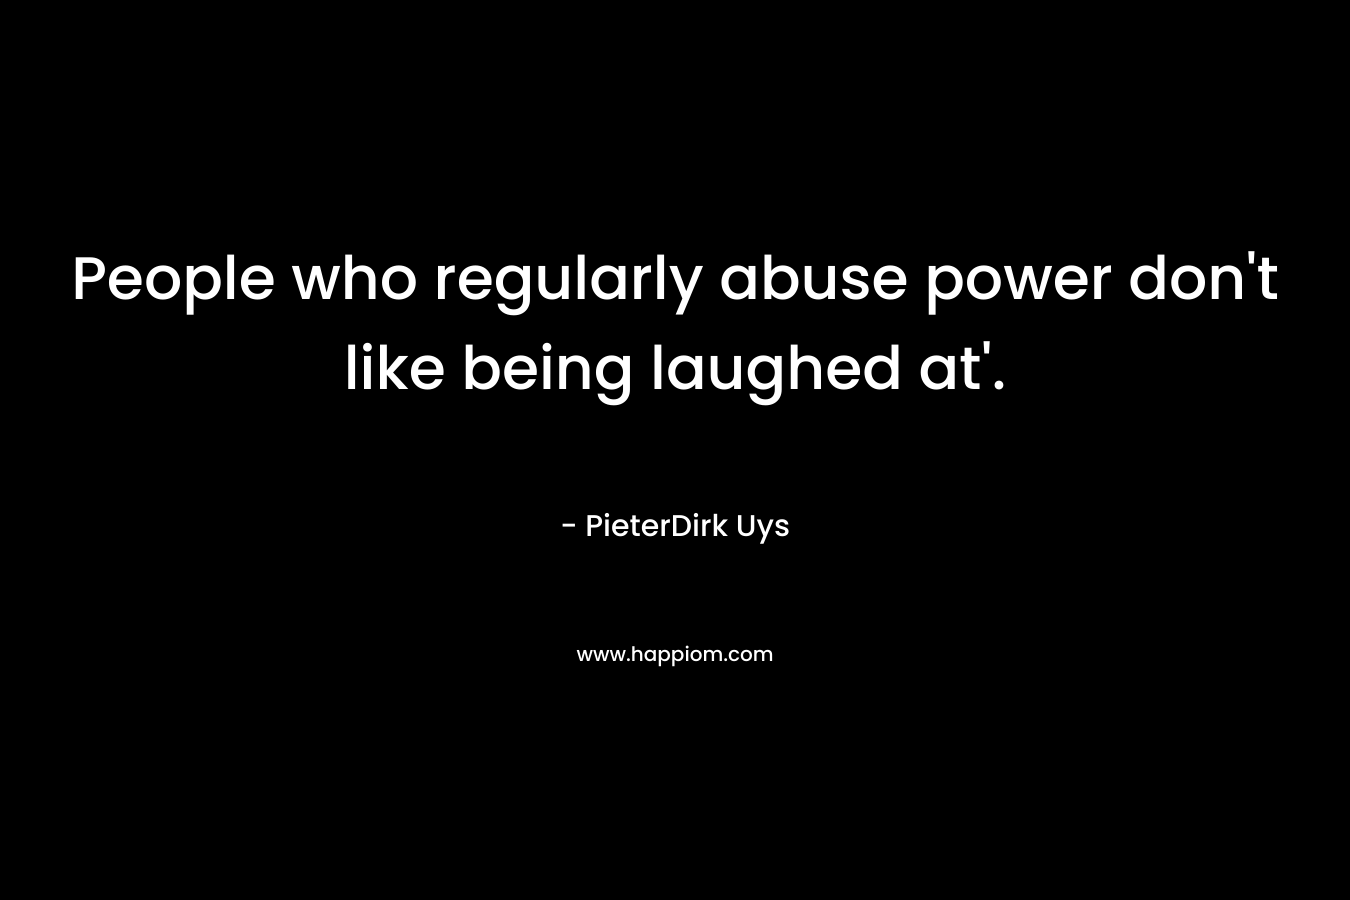 People who regularly abuse power don’t like being laughed at’. – PieterDirk Uys